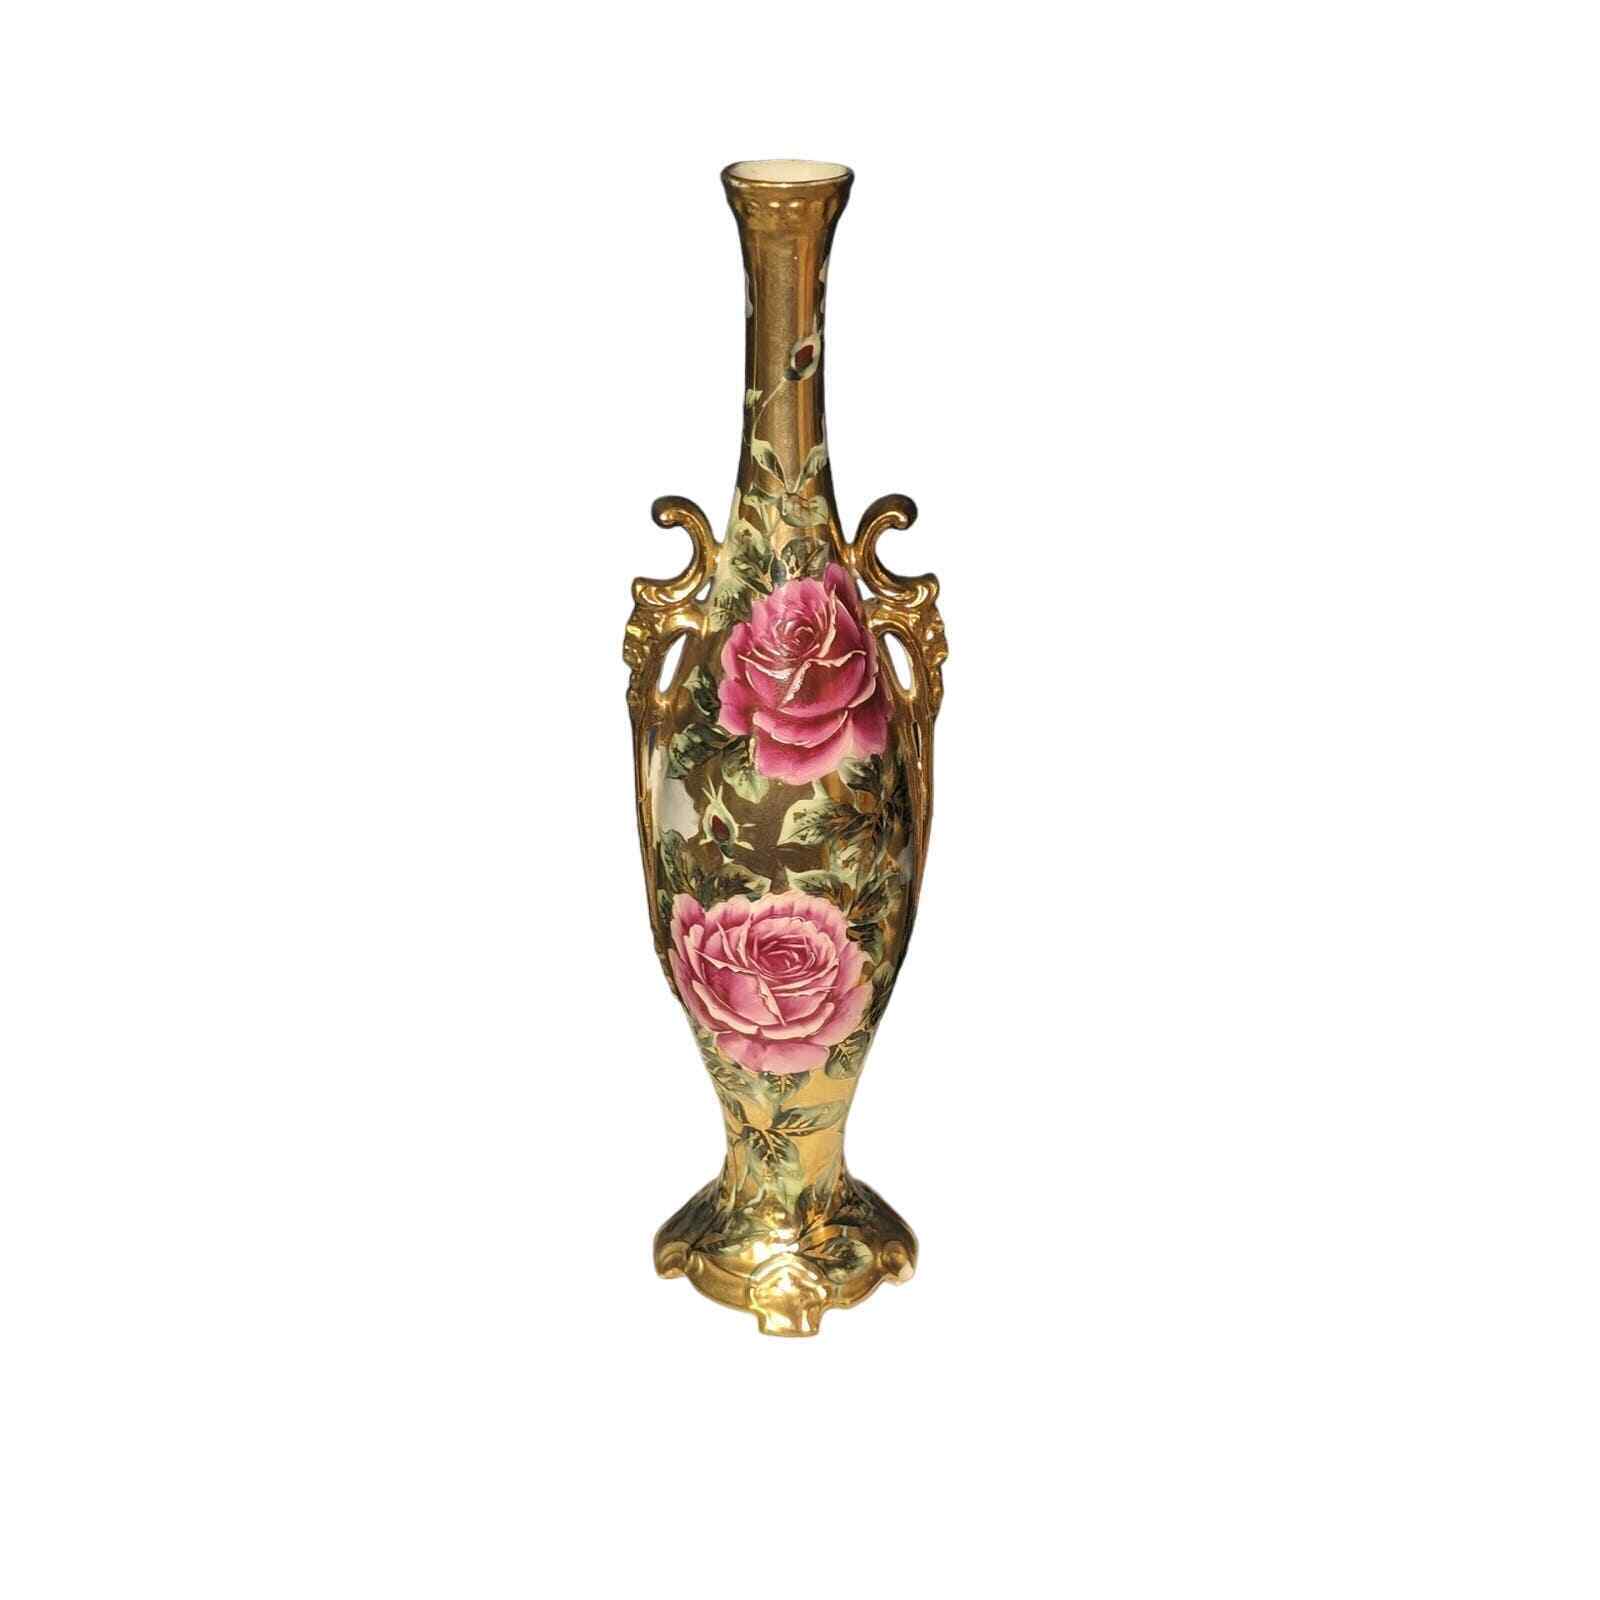 RARE Stunning Antique Handpainted Cabbage Rose Vase with 22K Gold Accents